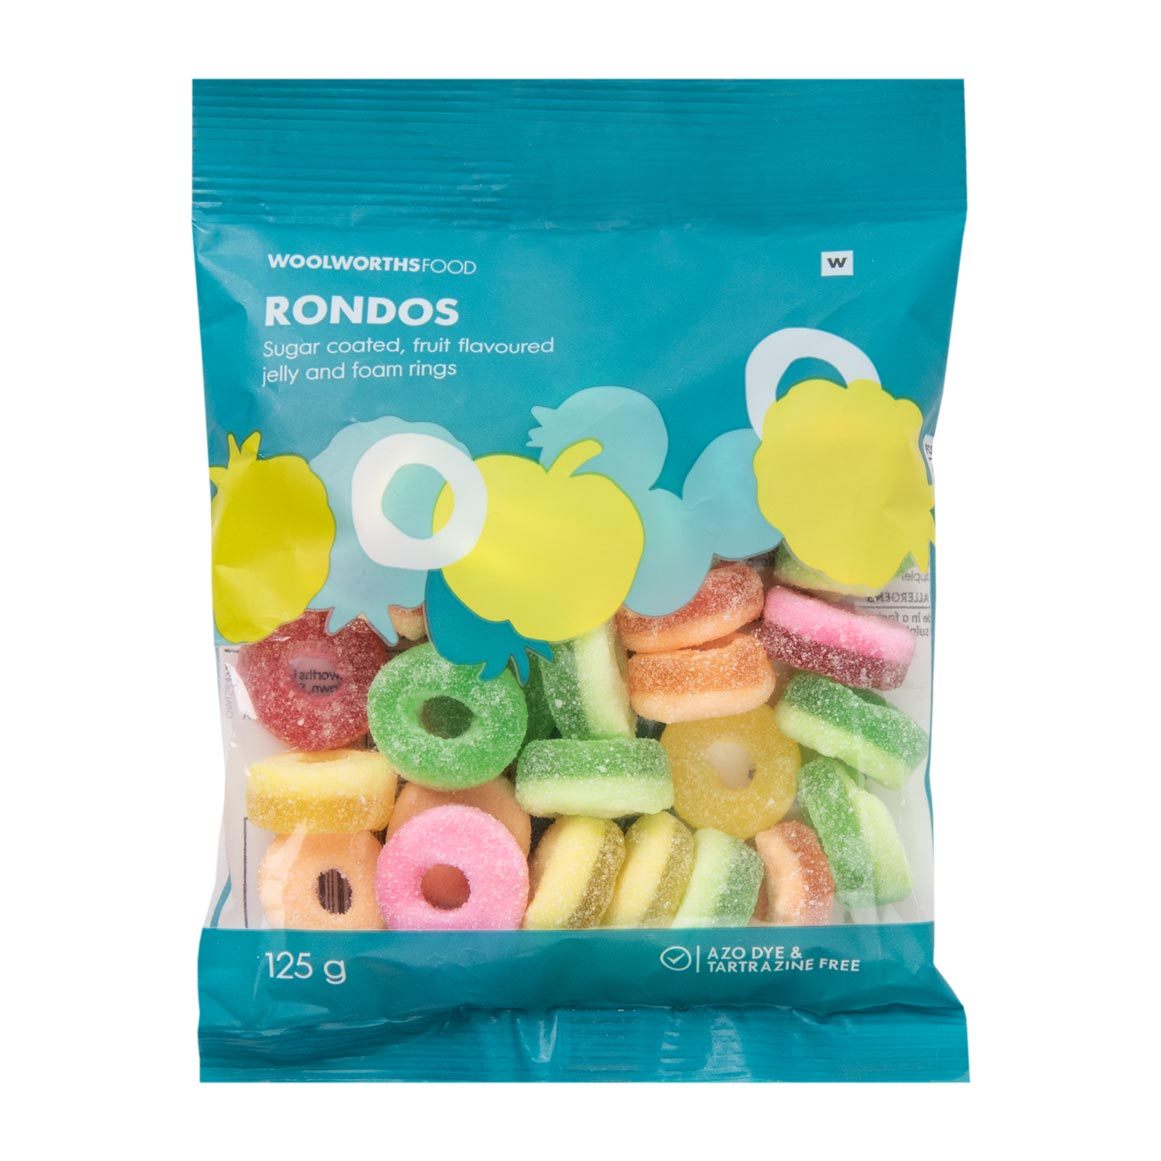 Rondos Jelly and Foam Gums 125 g | Woolworths.co.za